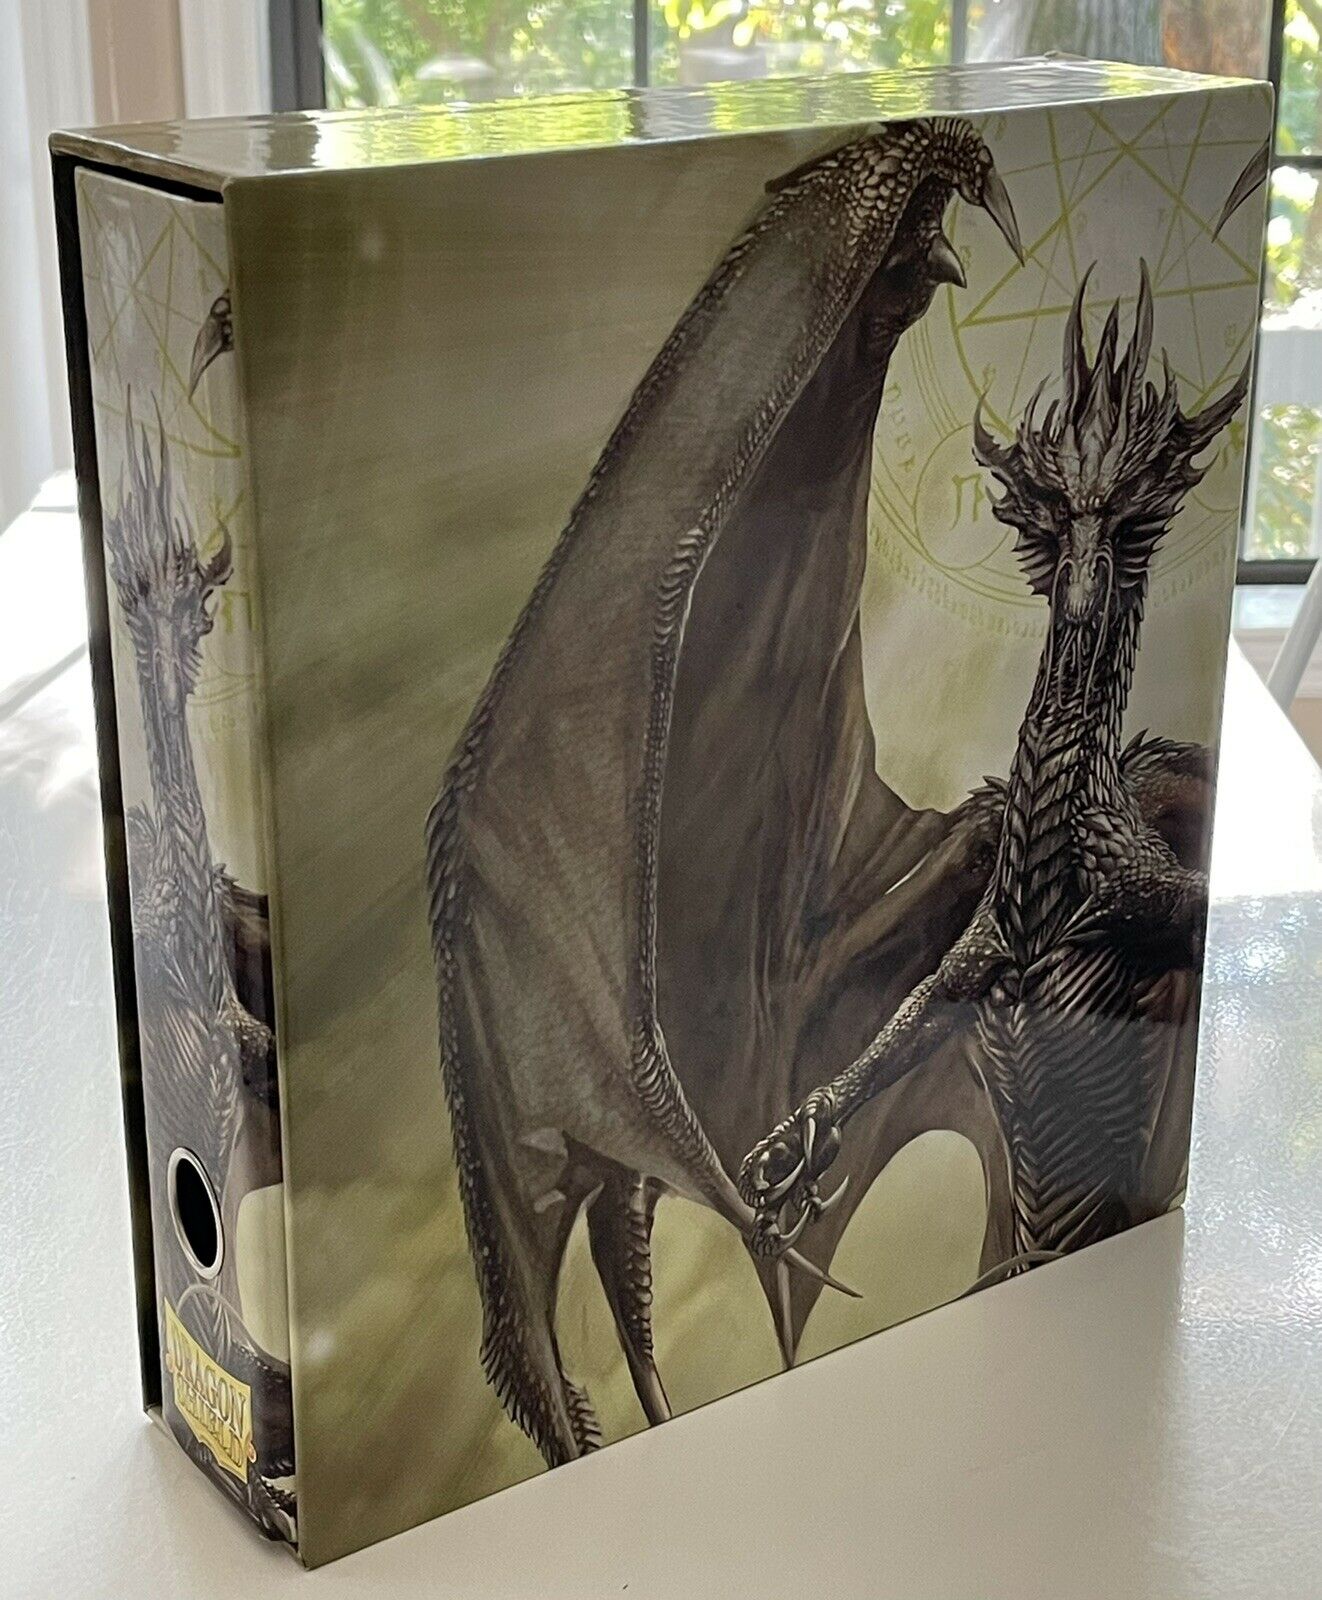 Dragon Shield Binder With Case By Arcane Tinmen- Excellent Condition!!